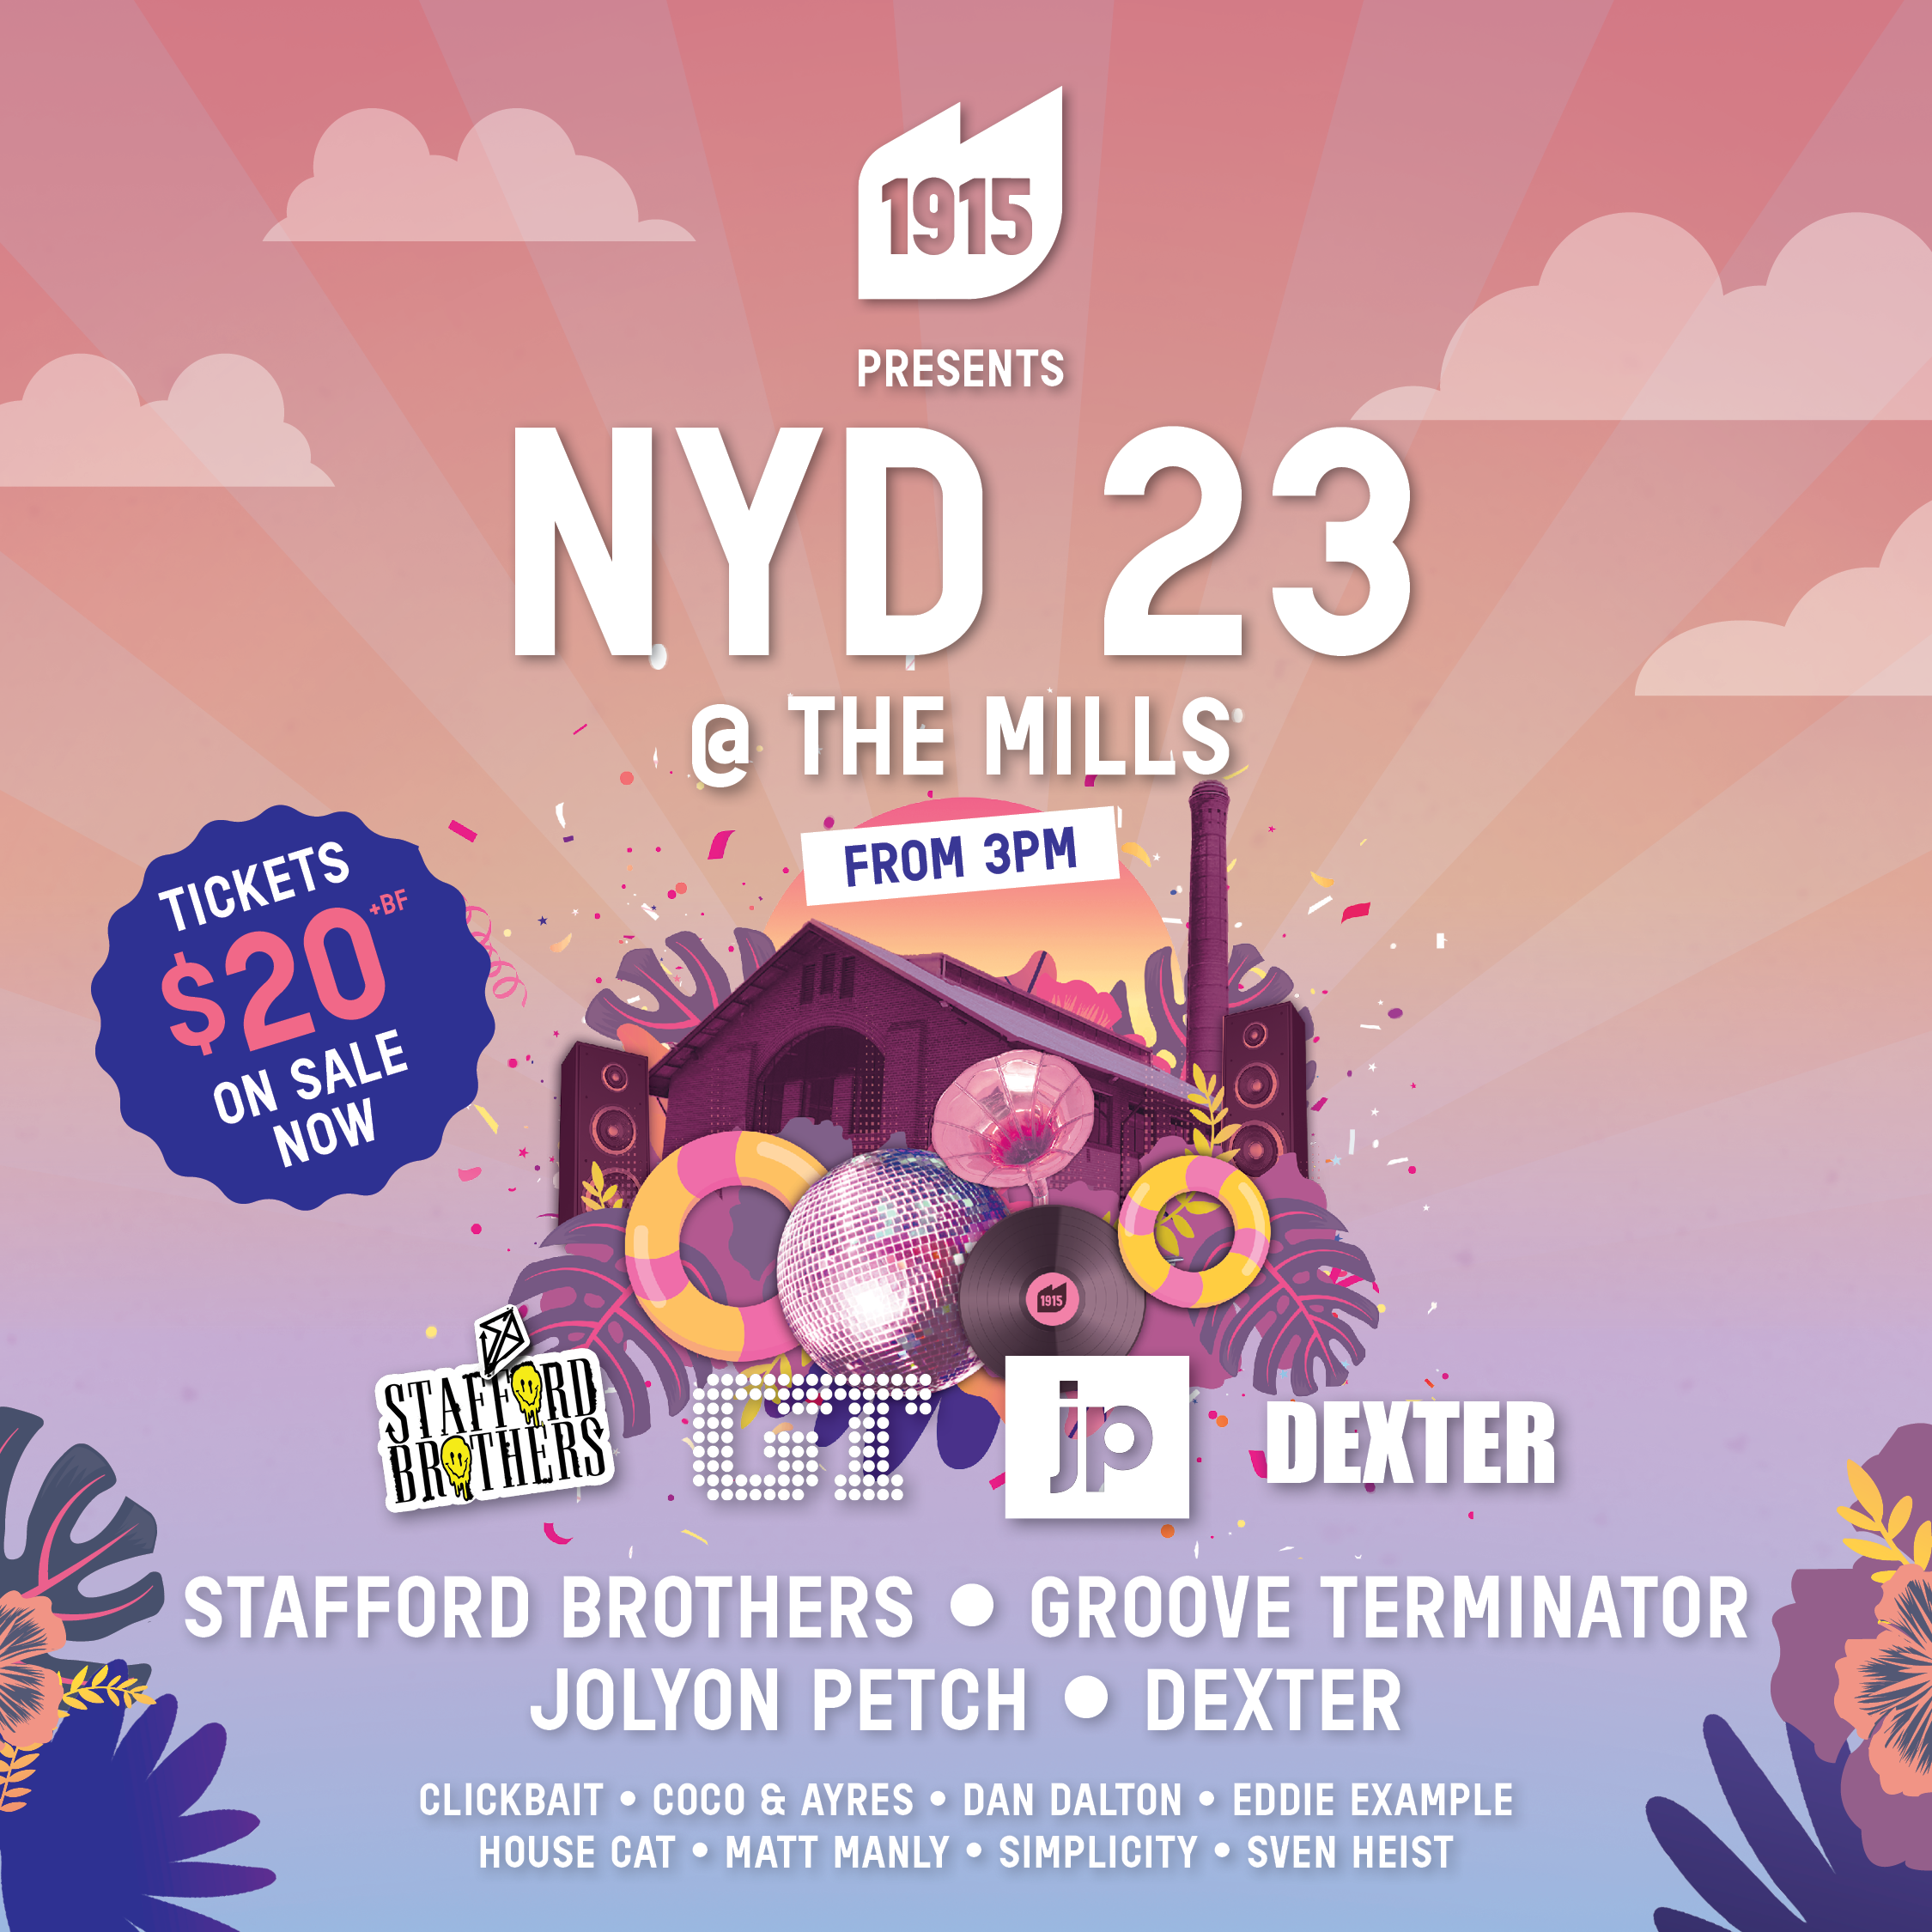 1915 presents NYD 2023 at The Mills - フライヤー表